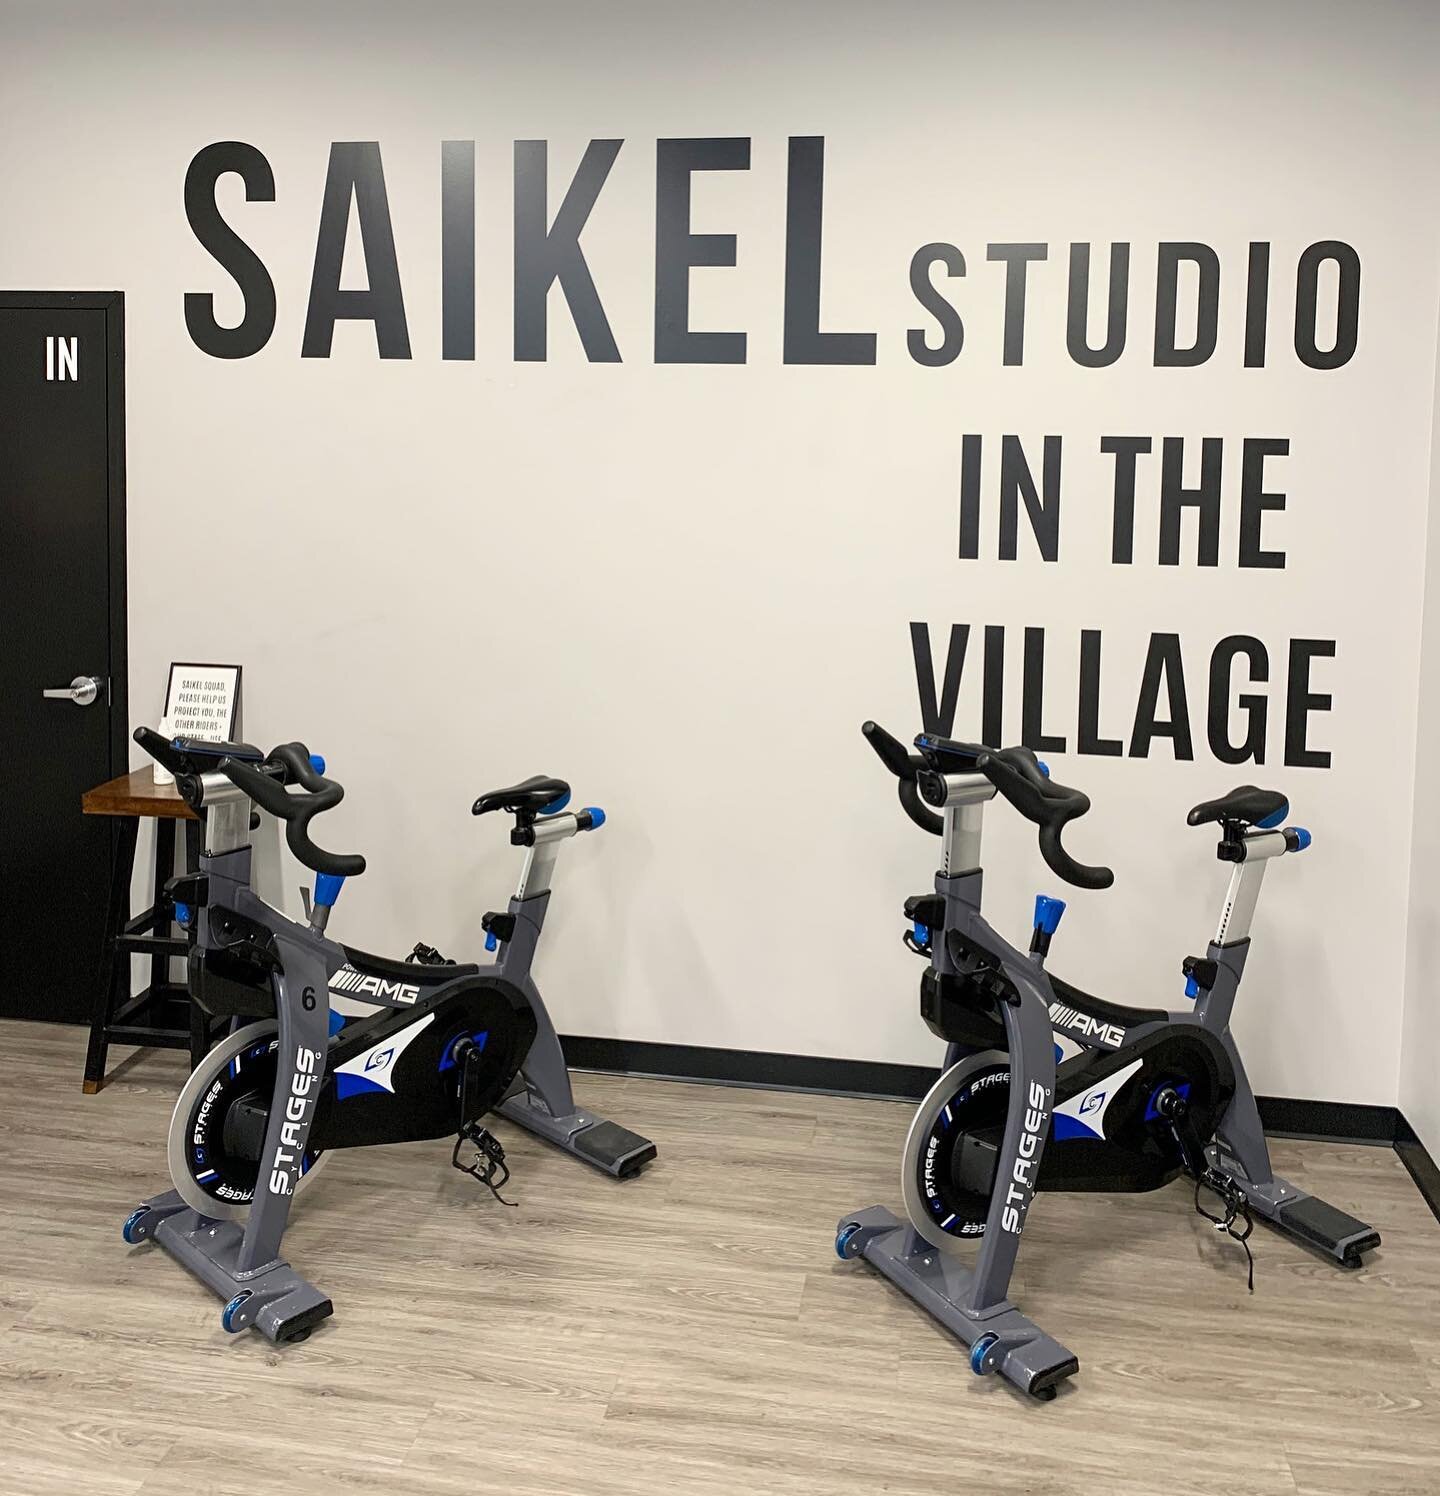 We&rsquo;re looking for Sweat Exchange team members! Looking to ride with us while on a budget? Then our Sweat Exchange program is perfect for you! Volunteer at our studio 4 hours a week and you&rsquo;re able to ride with us for FREE in exchange! 

W